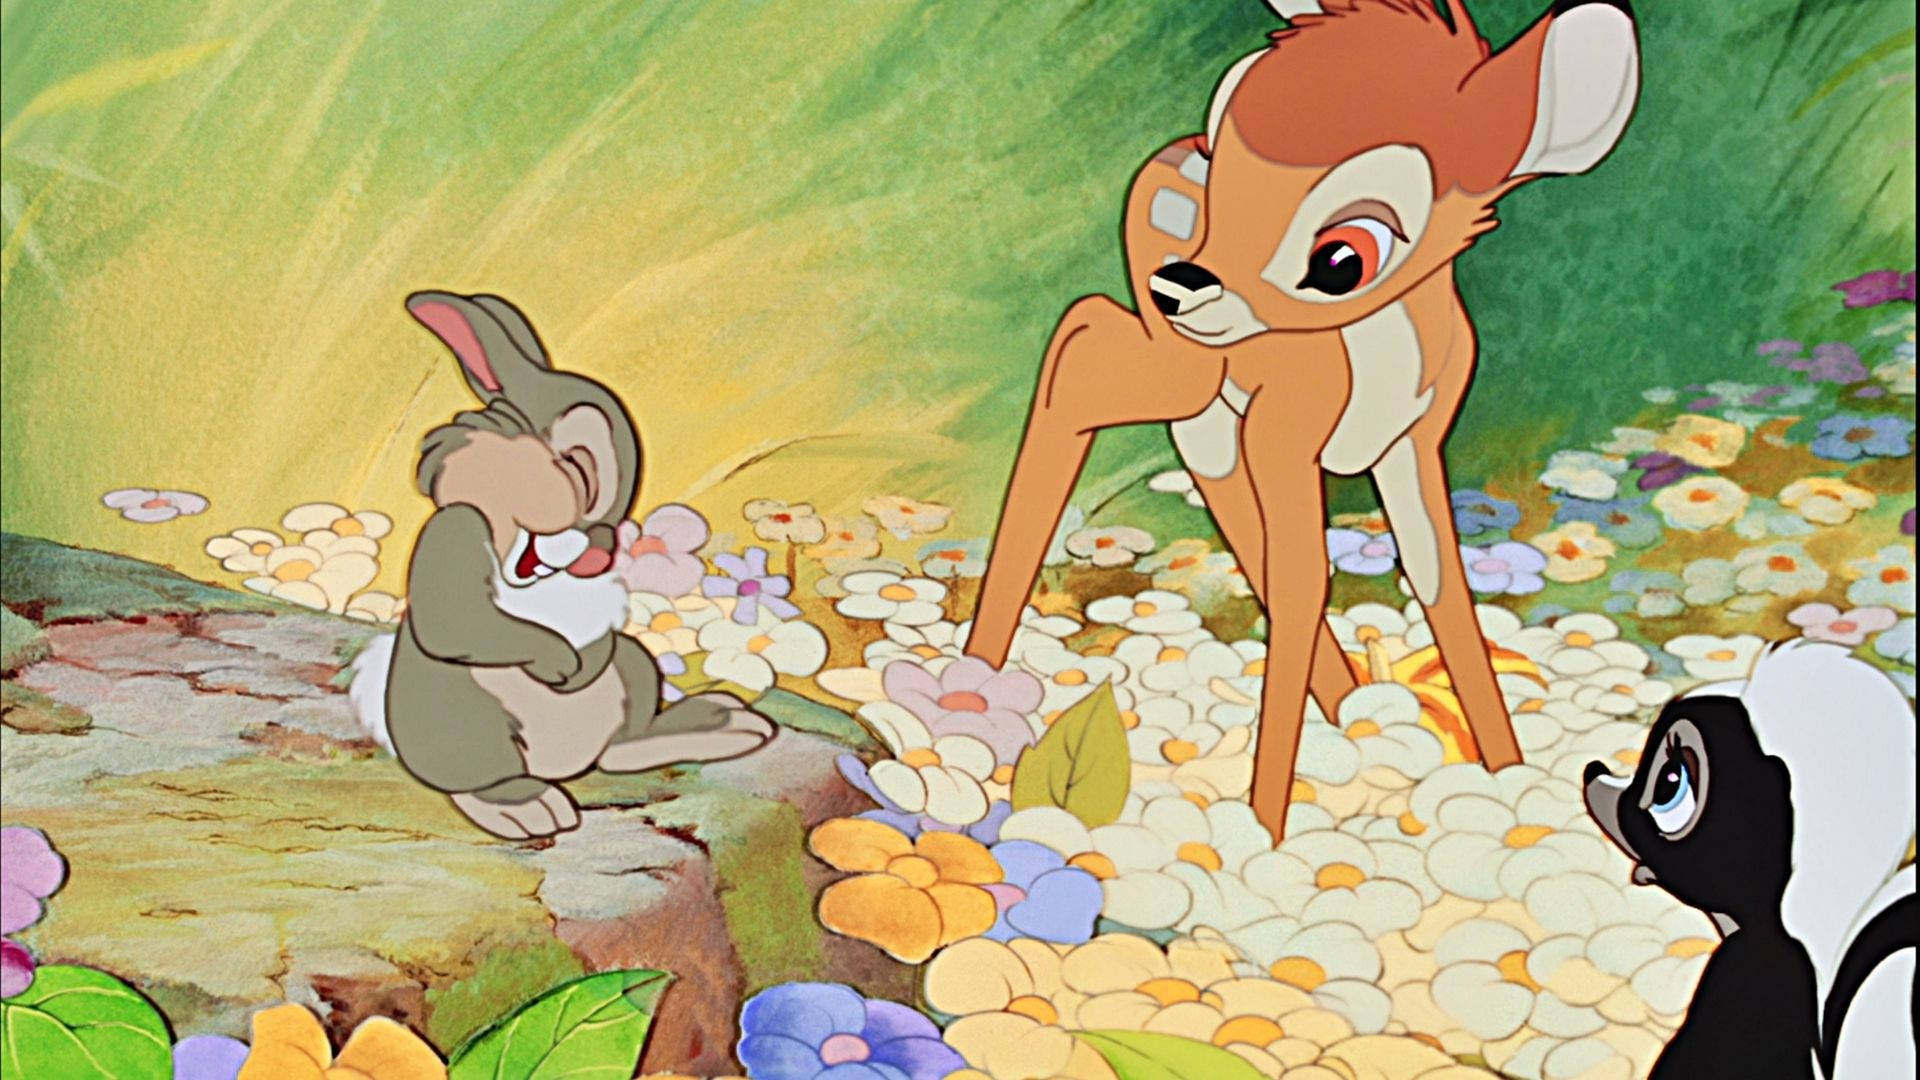 Thumper, The Adorable Disney Forest Bunny Wallpaper